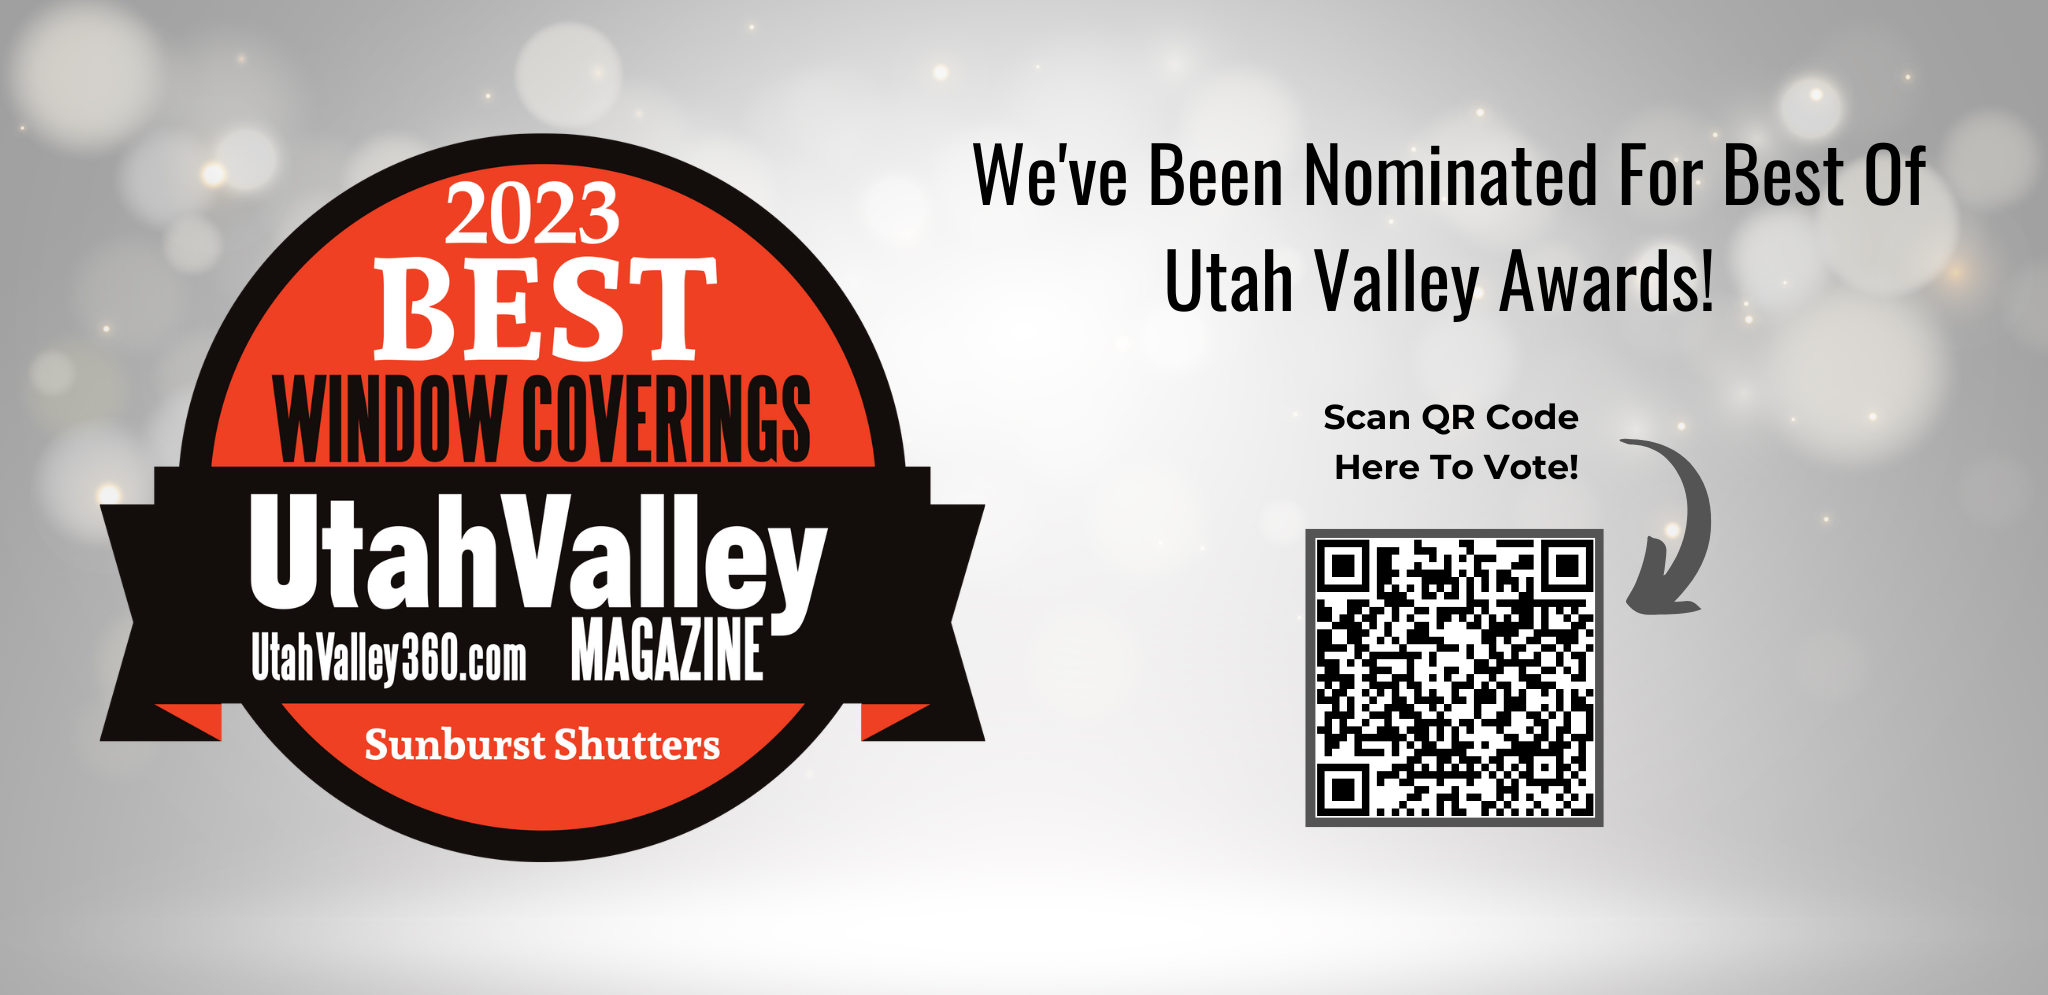 Promo banner for 2023 best window coverings of Utah badge nomination and vote for us QR code